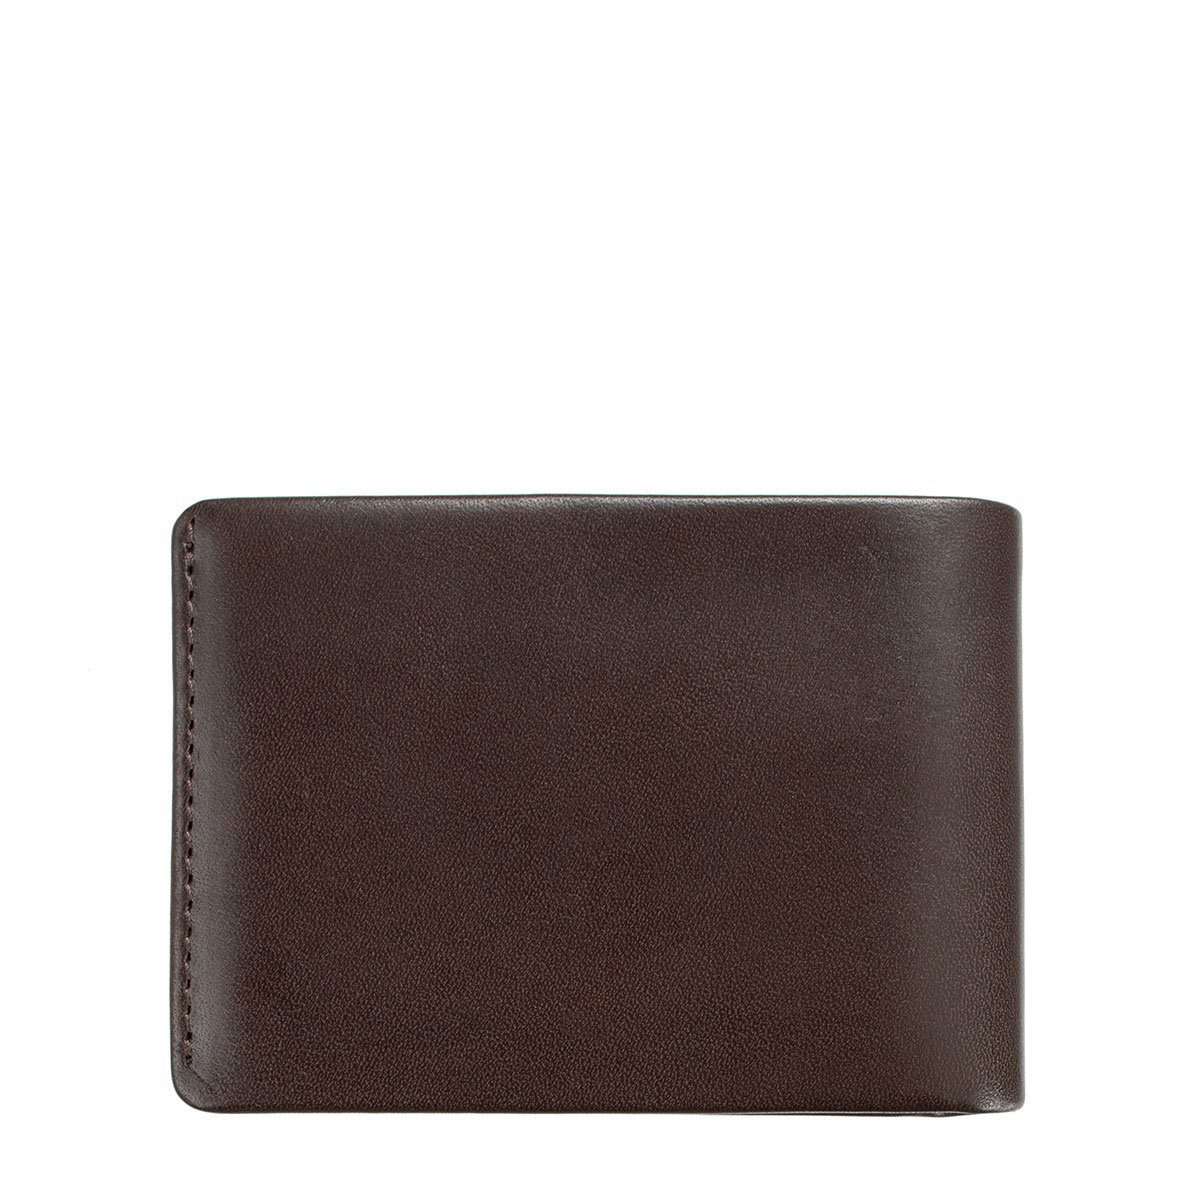 Status Anxiety Chocolate Jonah Wallet - LUXAH Gifts and Homewares